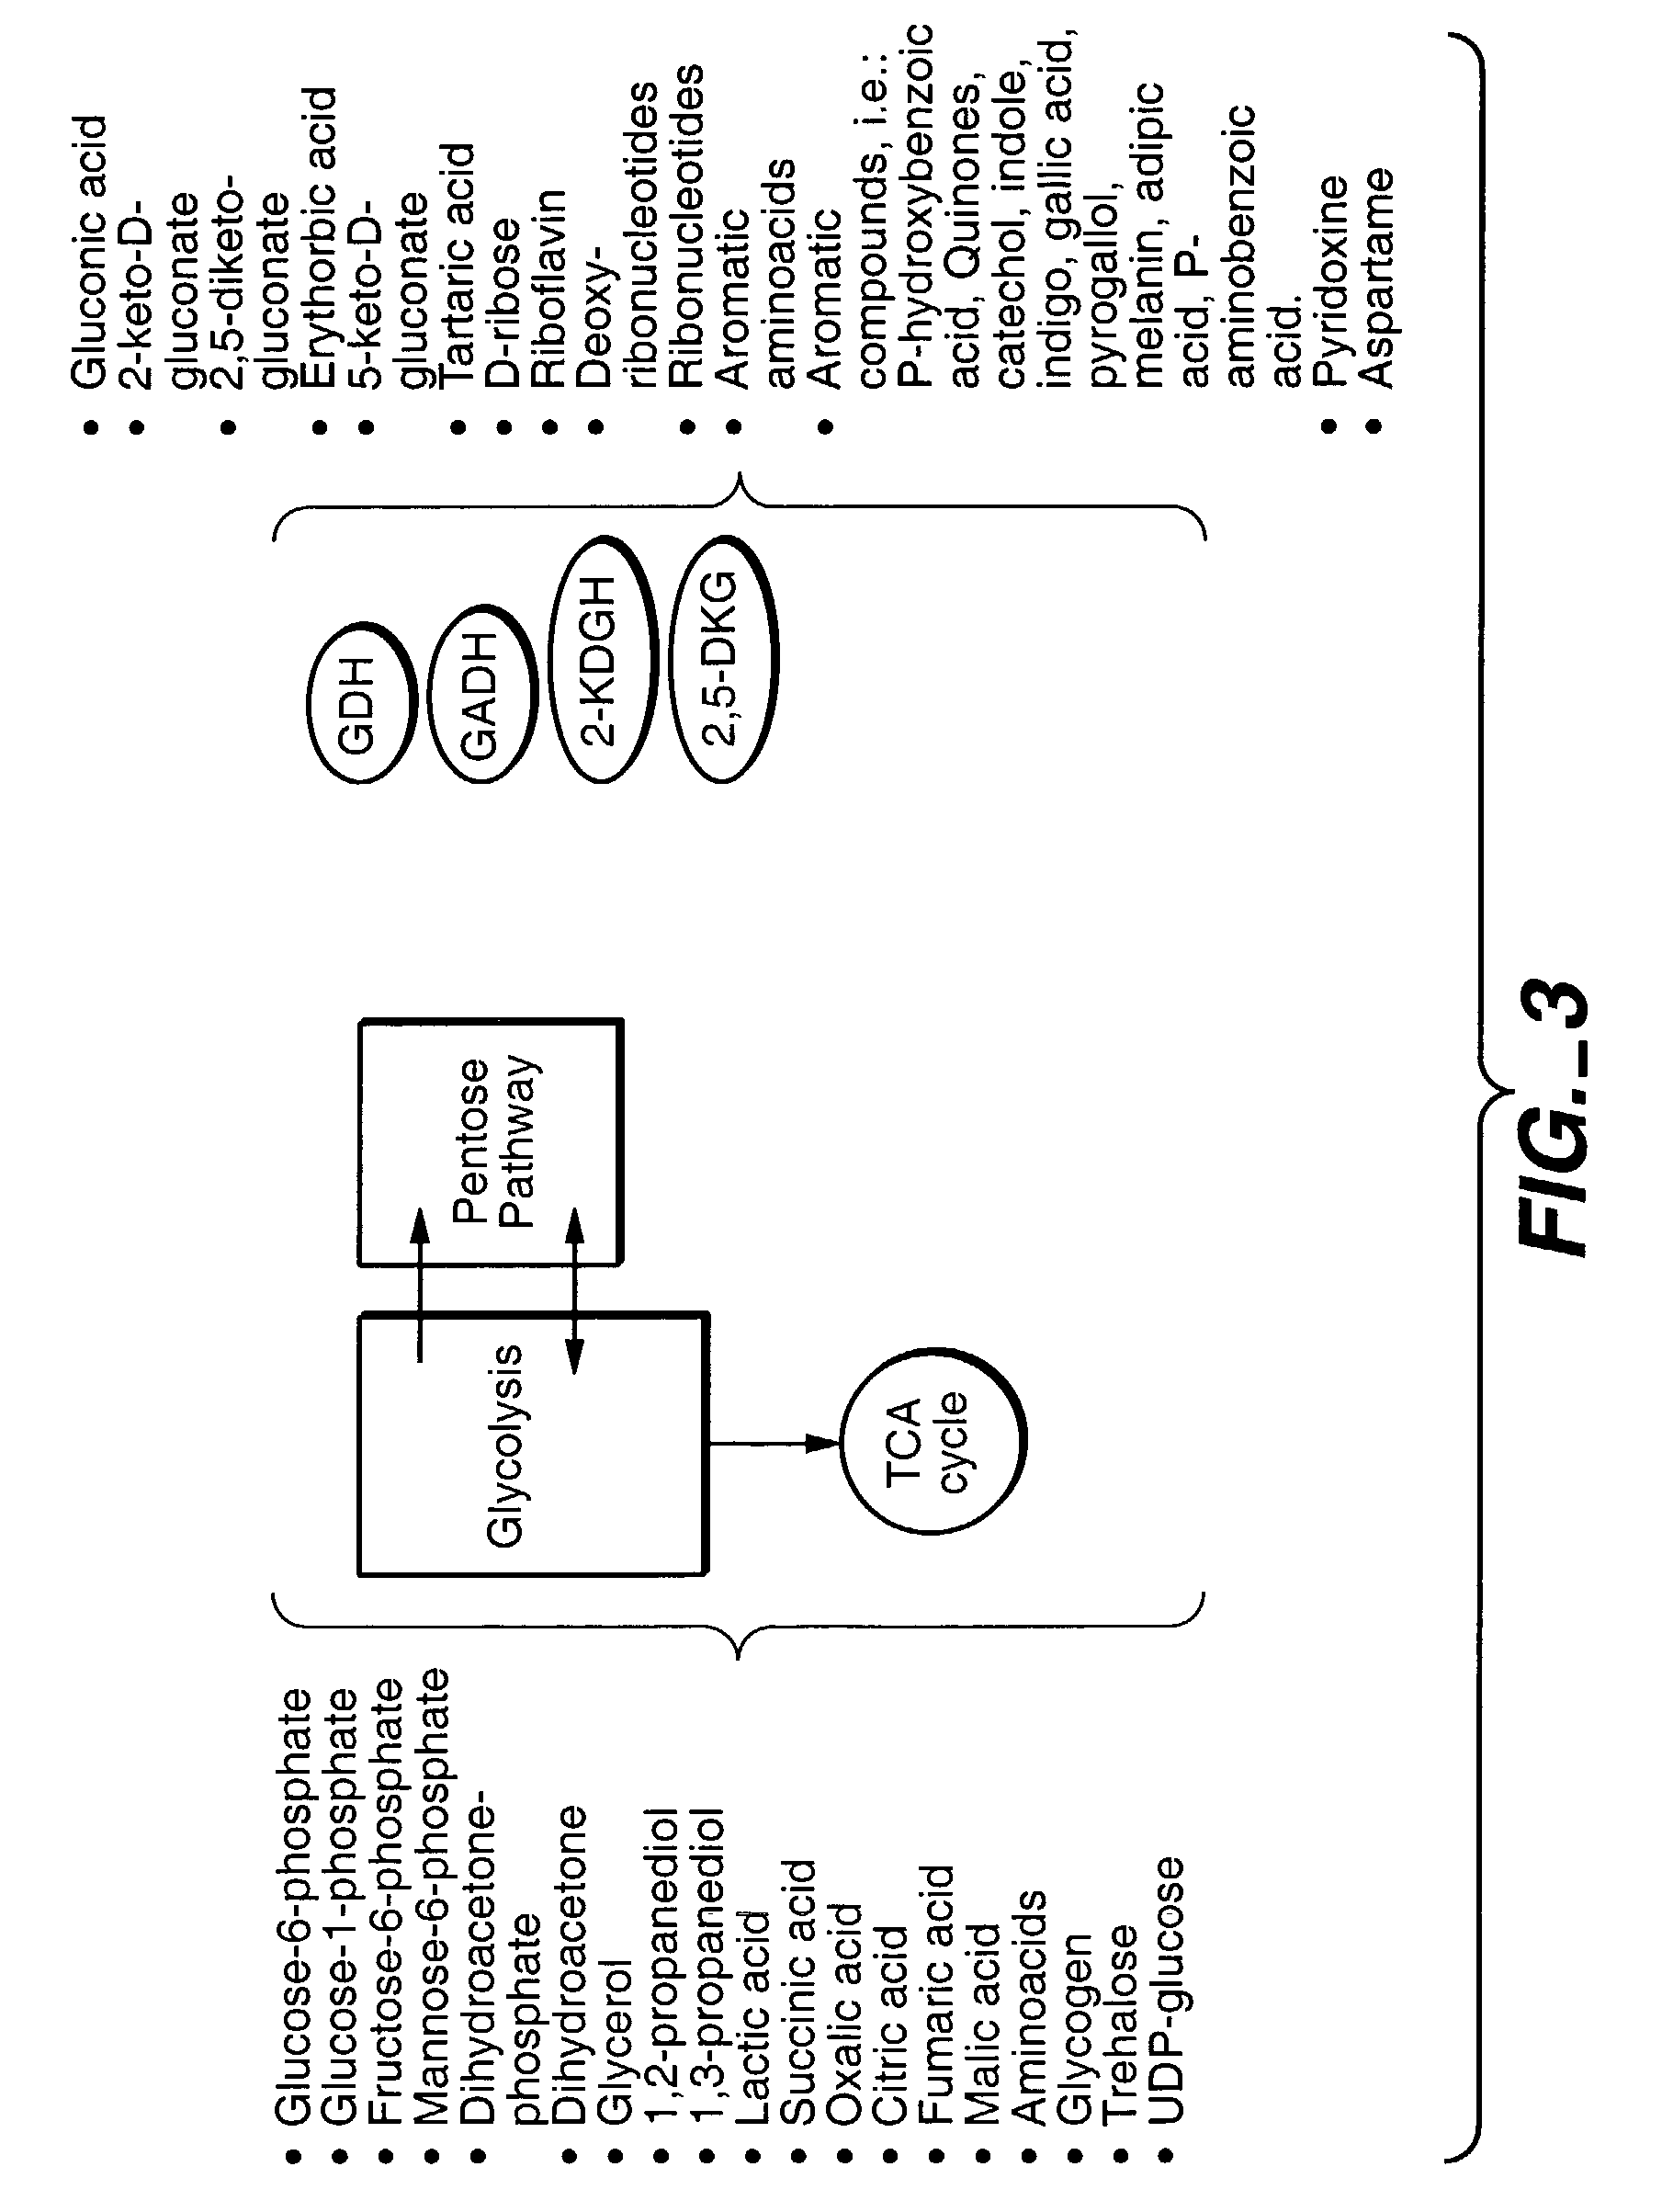 Method of uncoupling the catabolic pathway of glycolysis from the oxidative membrane bound pathway of glucose conversion